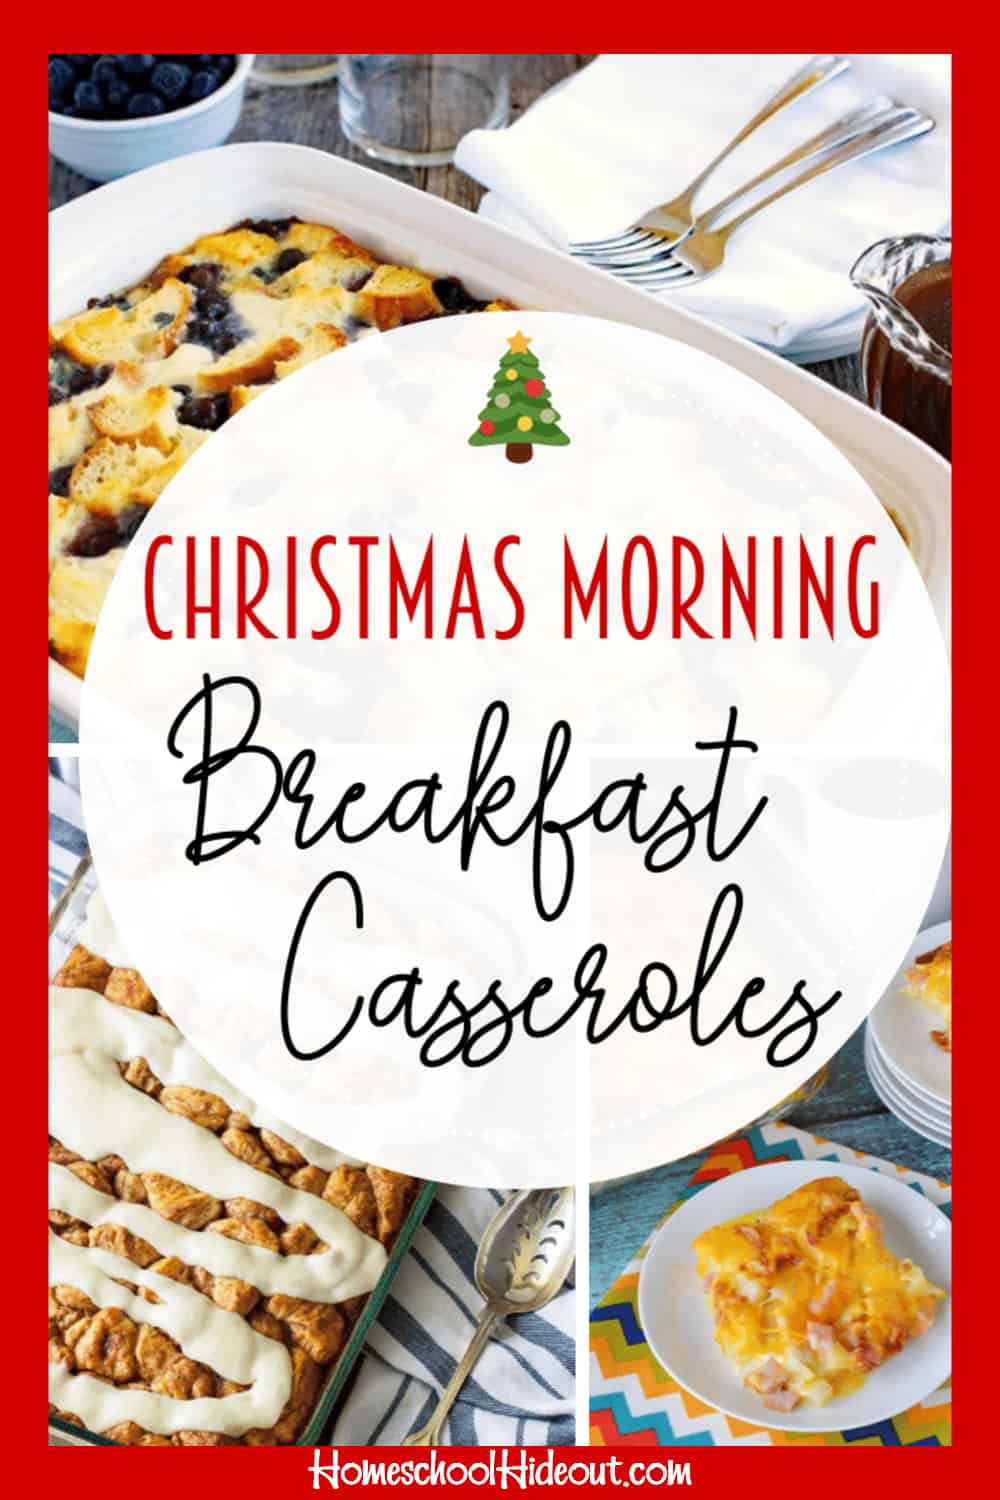 These easy Christmas morning breakfast casseroles make Christmas morning a breeze! I love not having to work hard on Christmas morning, while everyone waits for me to cook! Pop these in the oven and breakfast will be ready once we're done opening gifts! #christmas #morning #casserole